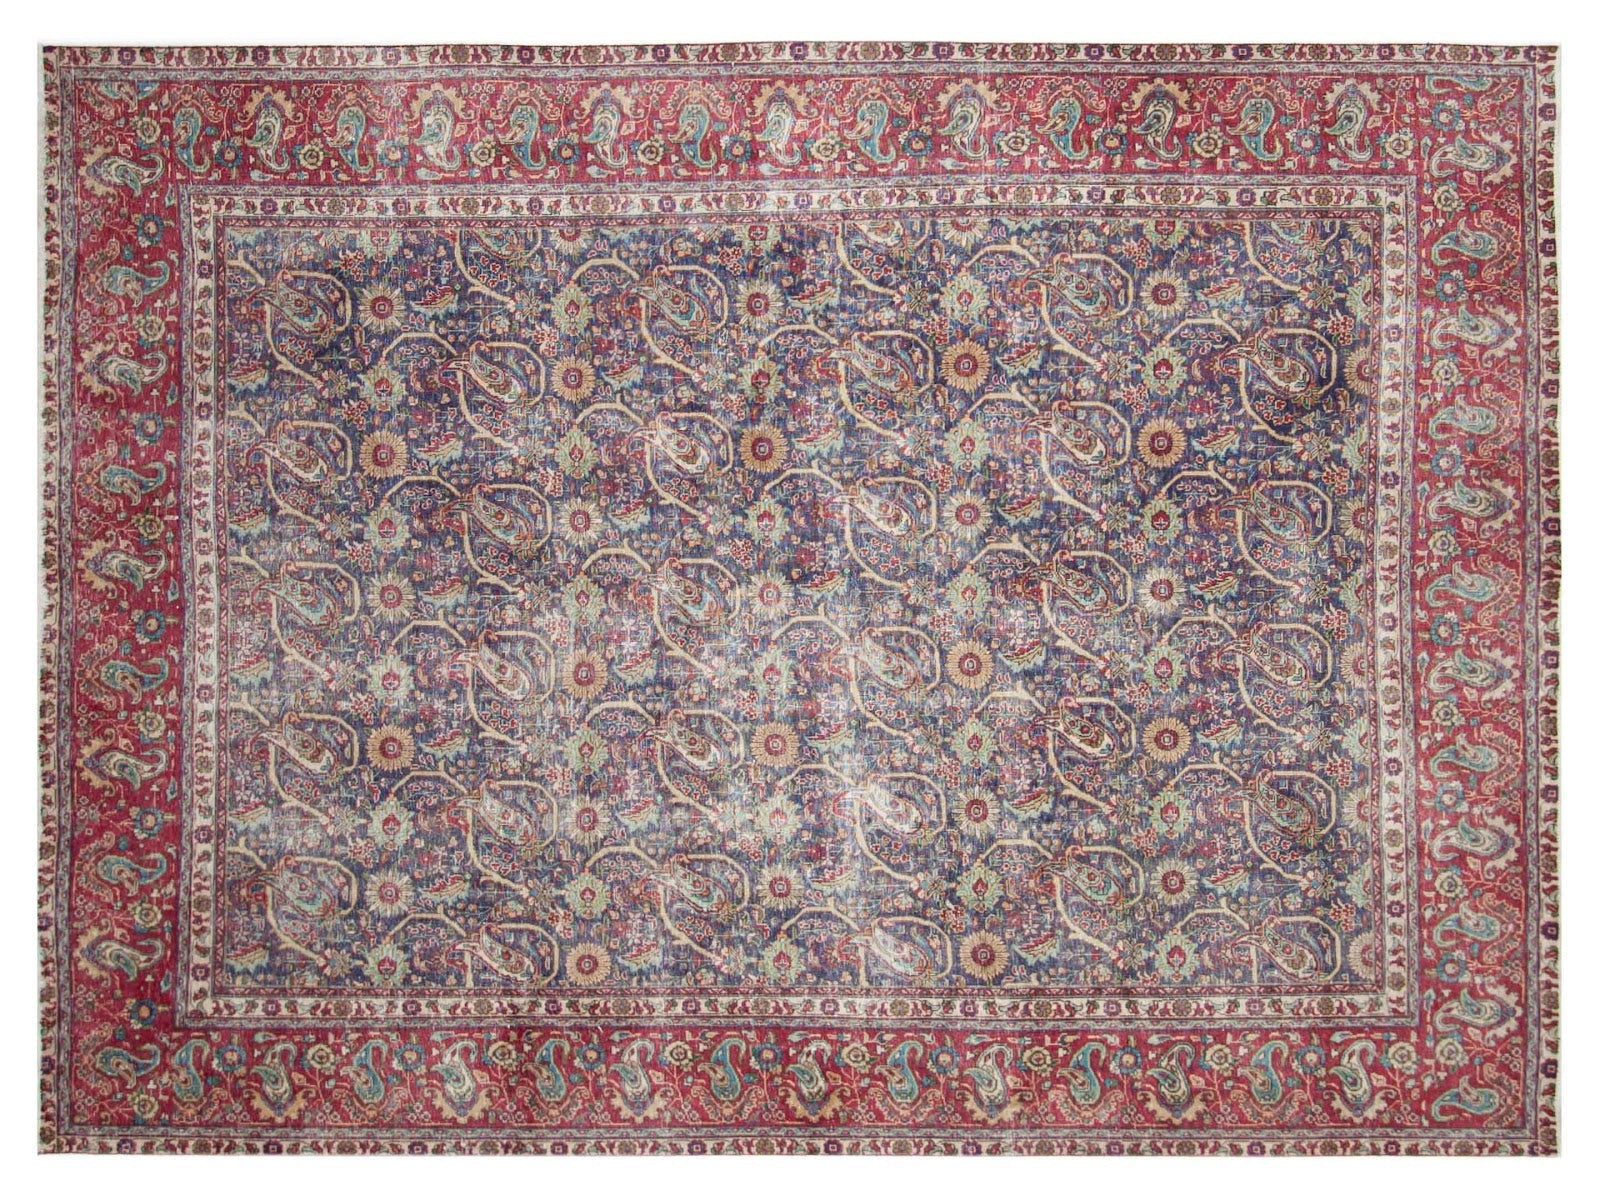 9x12 faded vintage Persian wool rug with blue central color and traditional red border, featuring allover Persian motifs